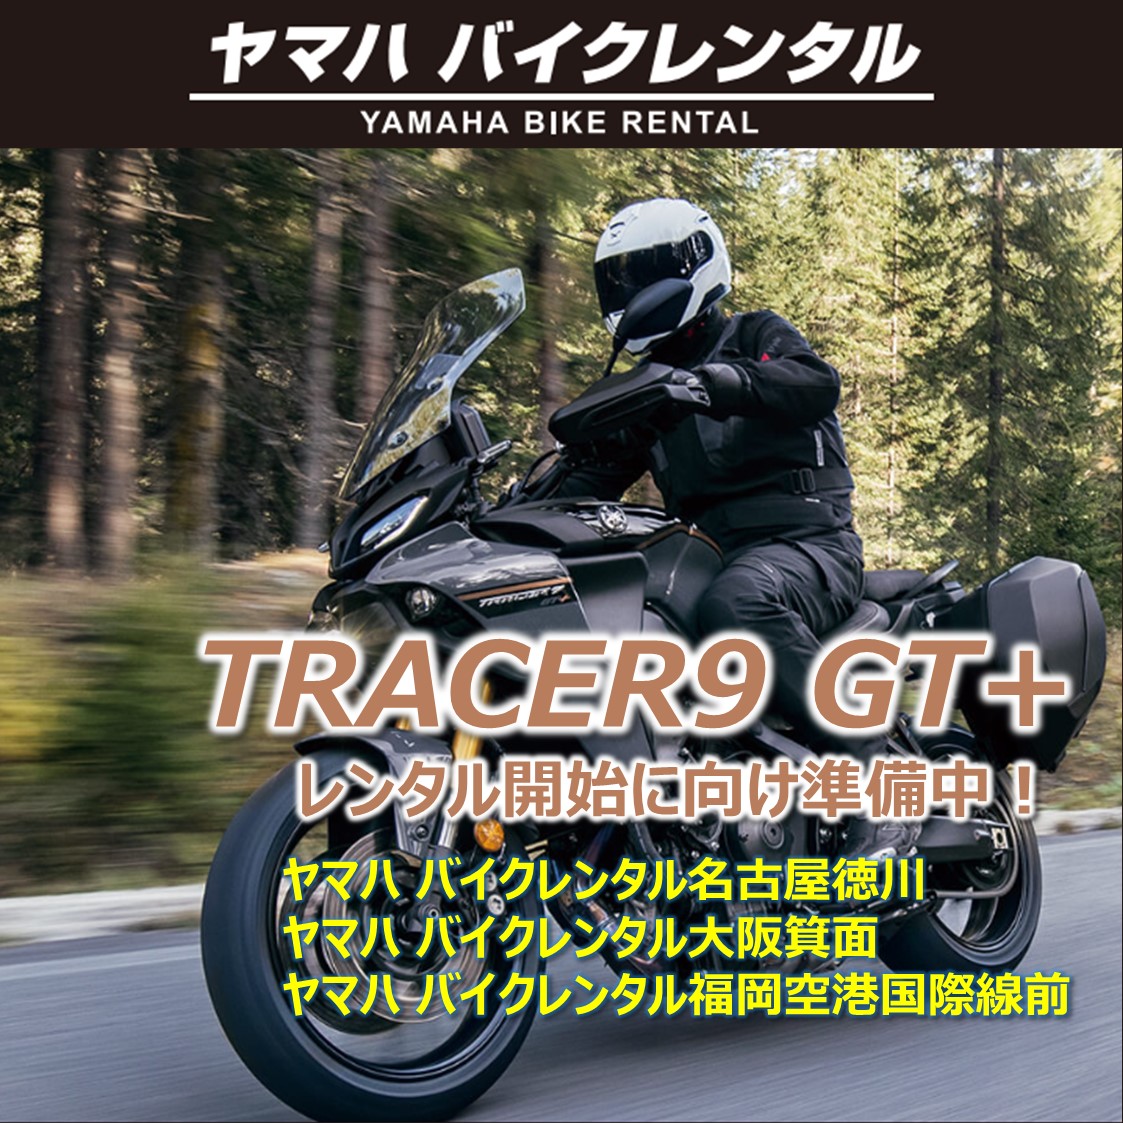 TRACER9 GT+